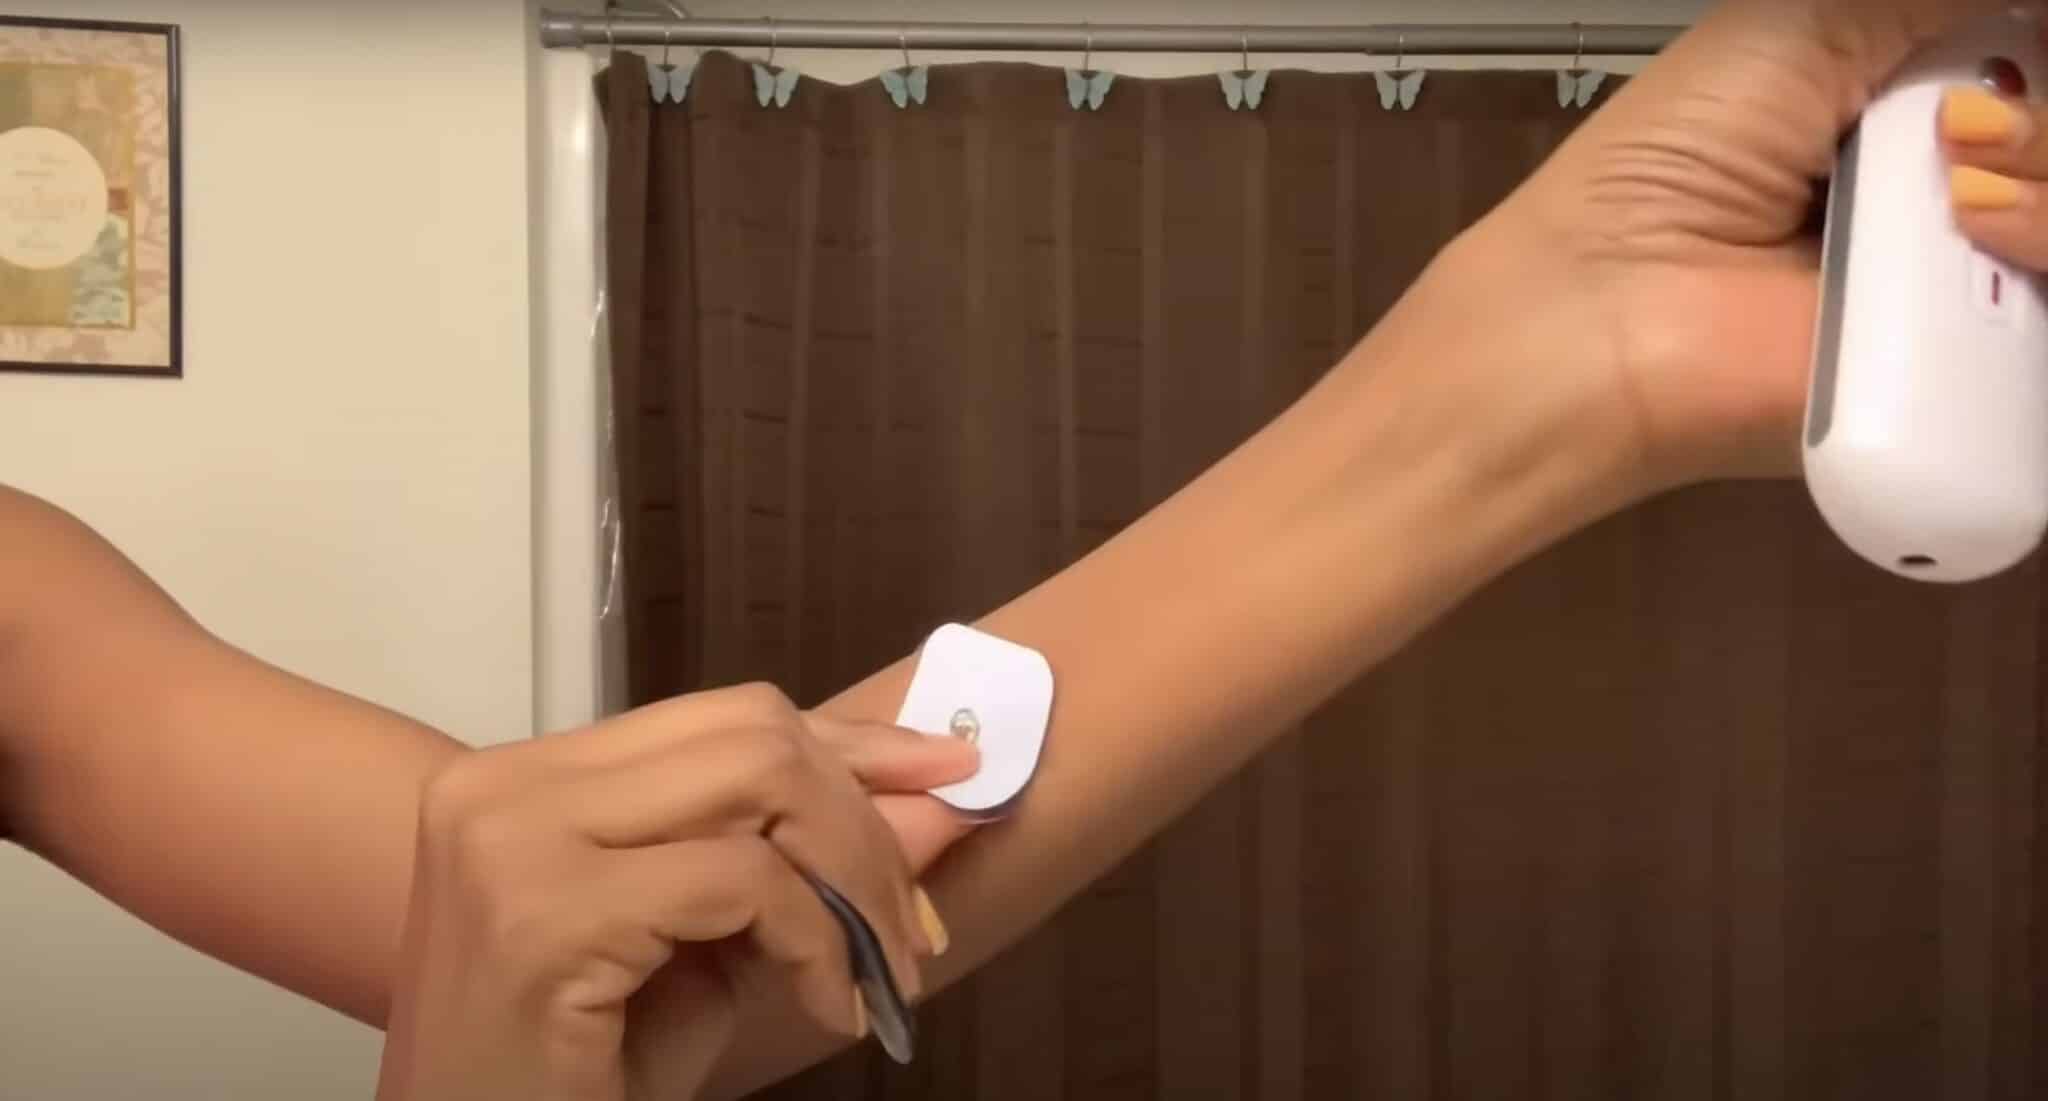 Stick electrode pads on your arm for using EMS function